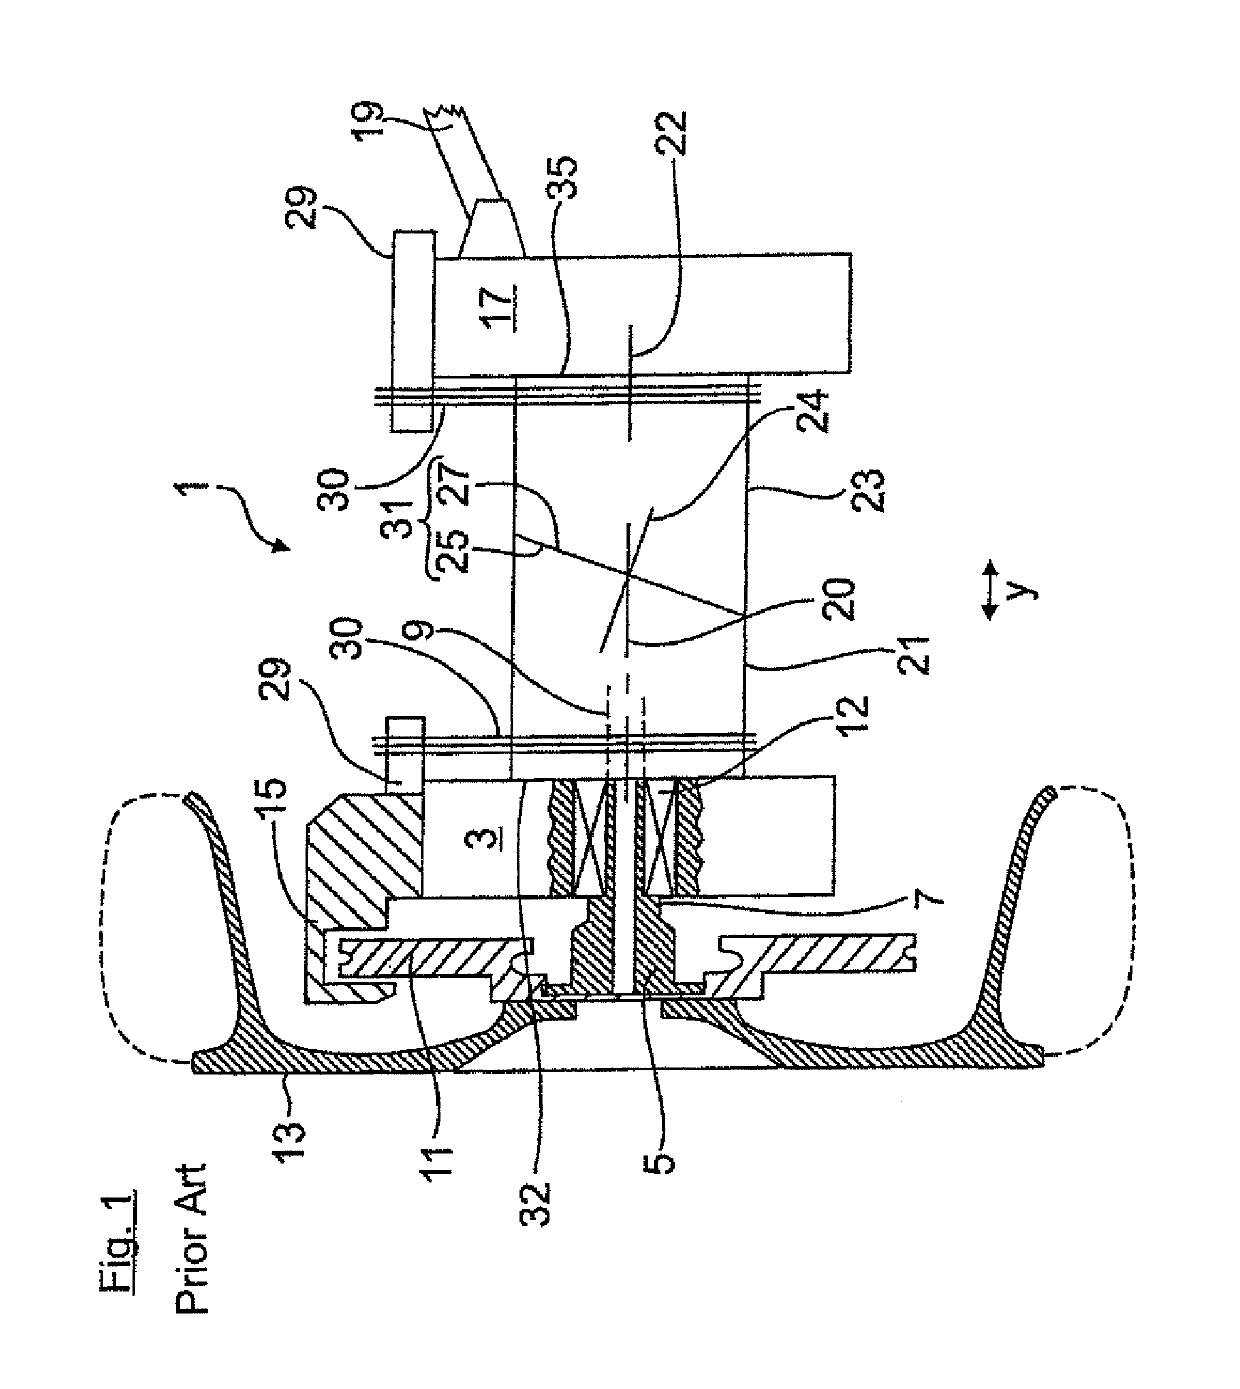 Device for adjusting camber and/or toe of a vehicle wheel